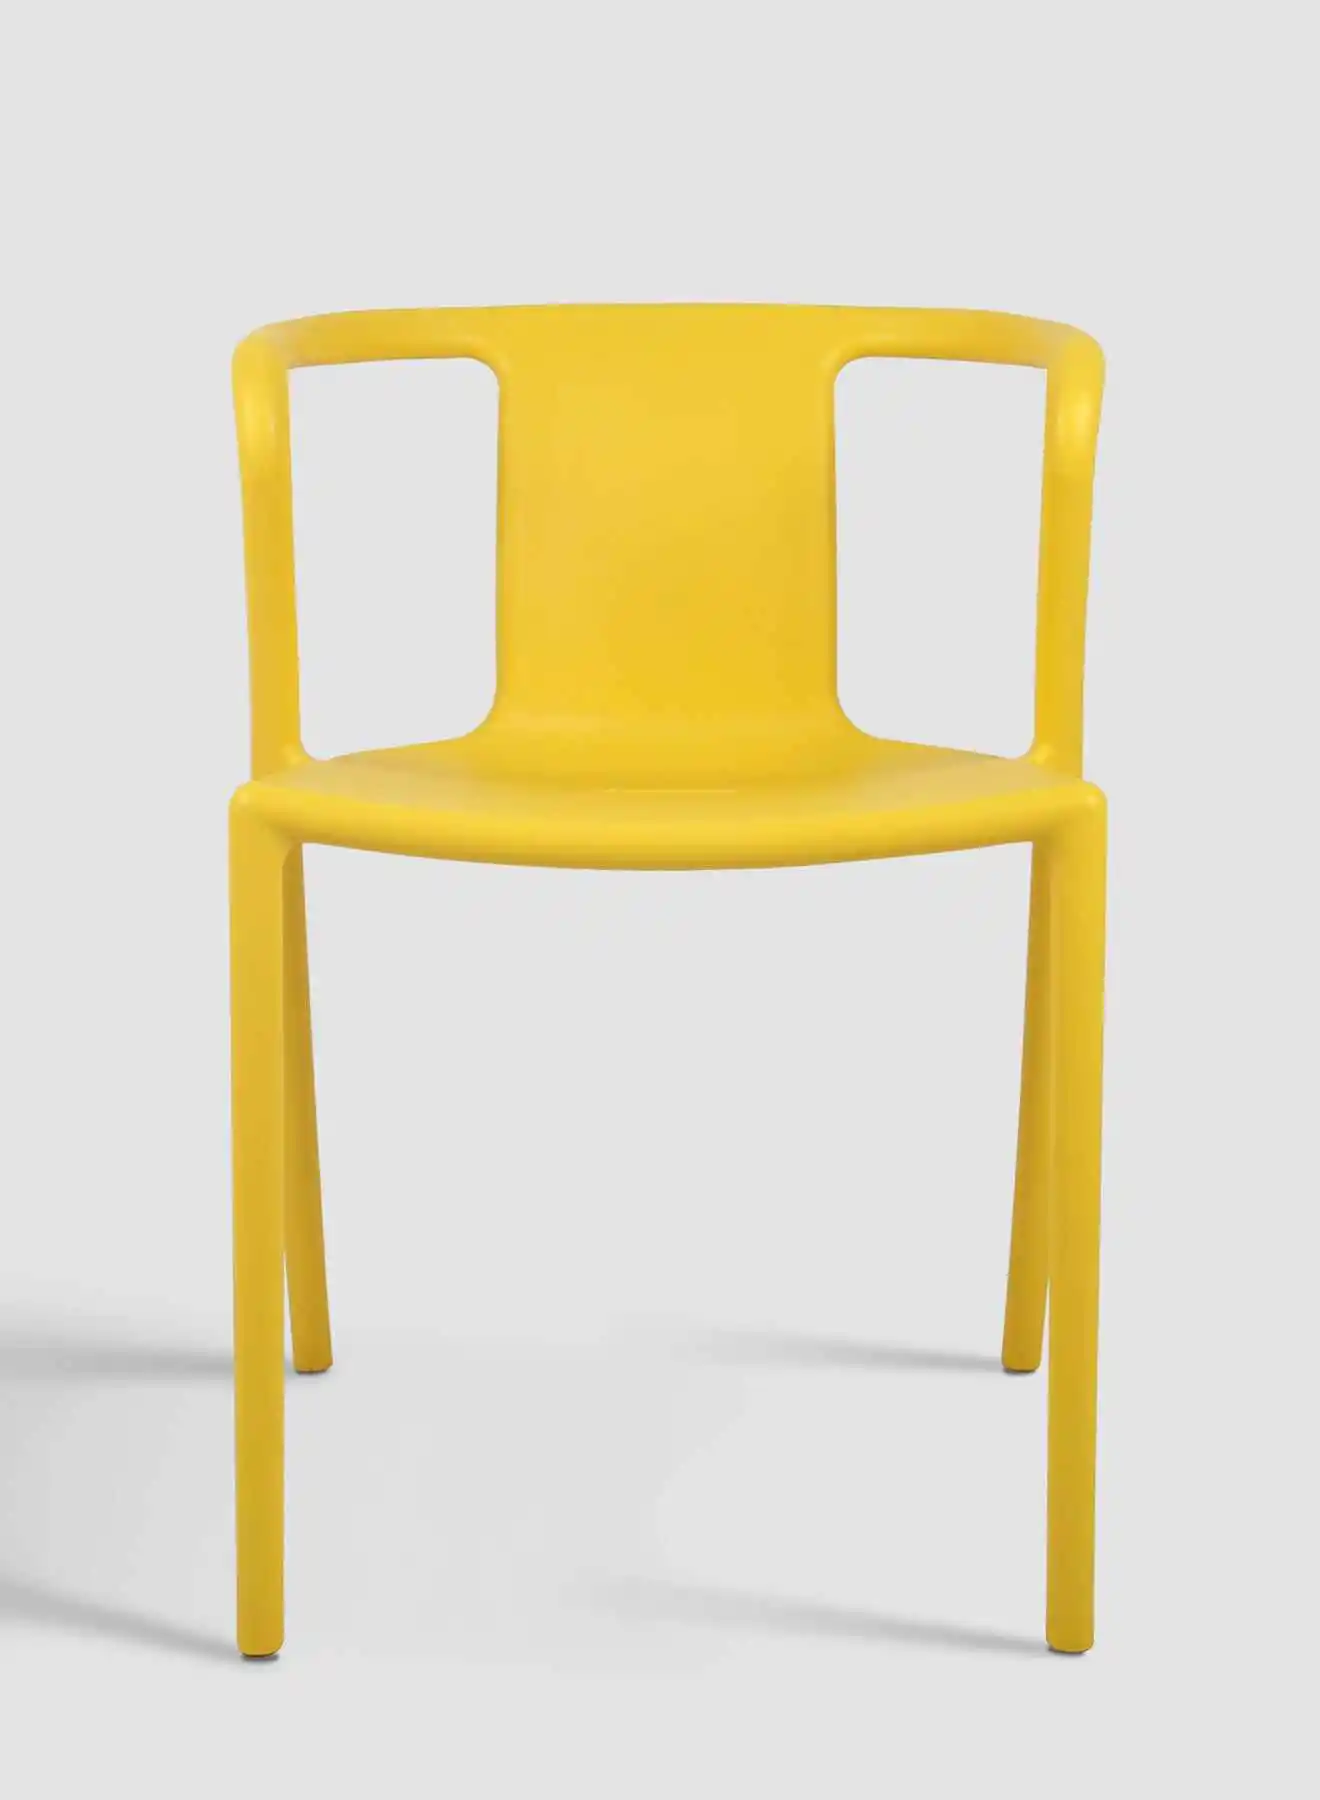 Switch Dining Chair In Yellow Plastic Chair Size  53 X 52 X 75Cm